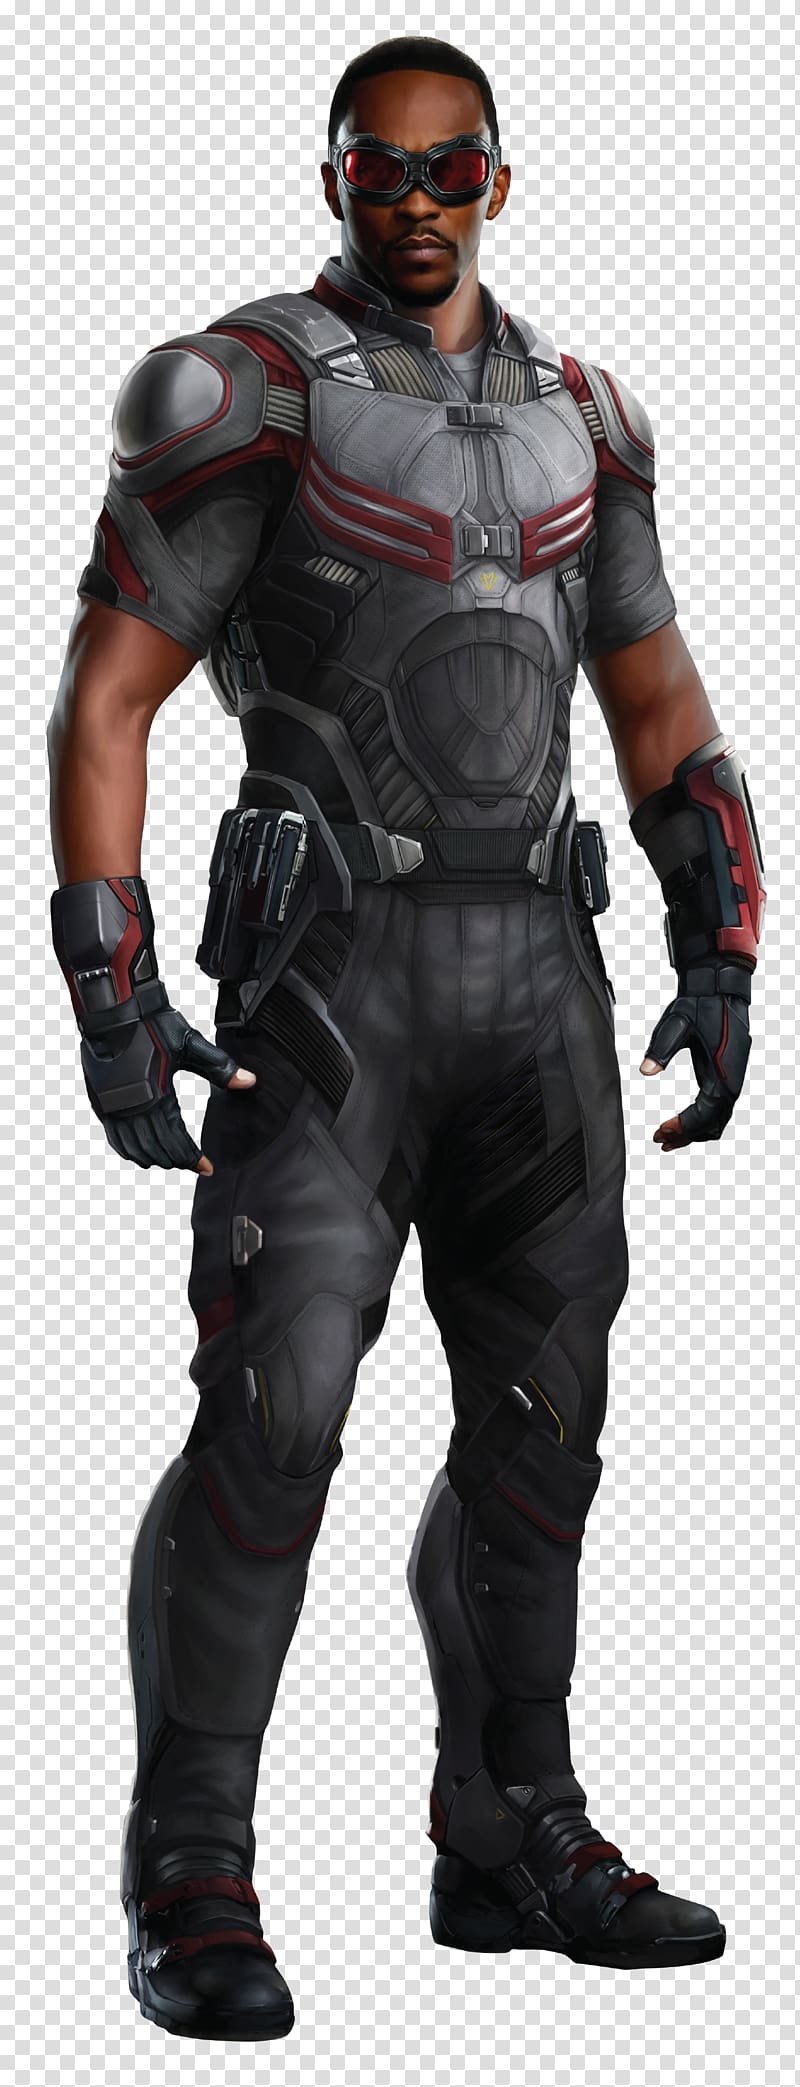 Marvel's Falcon, Anthony Mackie Falcon Vision Captain America Black Widow, falcon transparent background PNG clipart